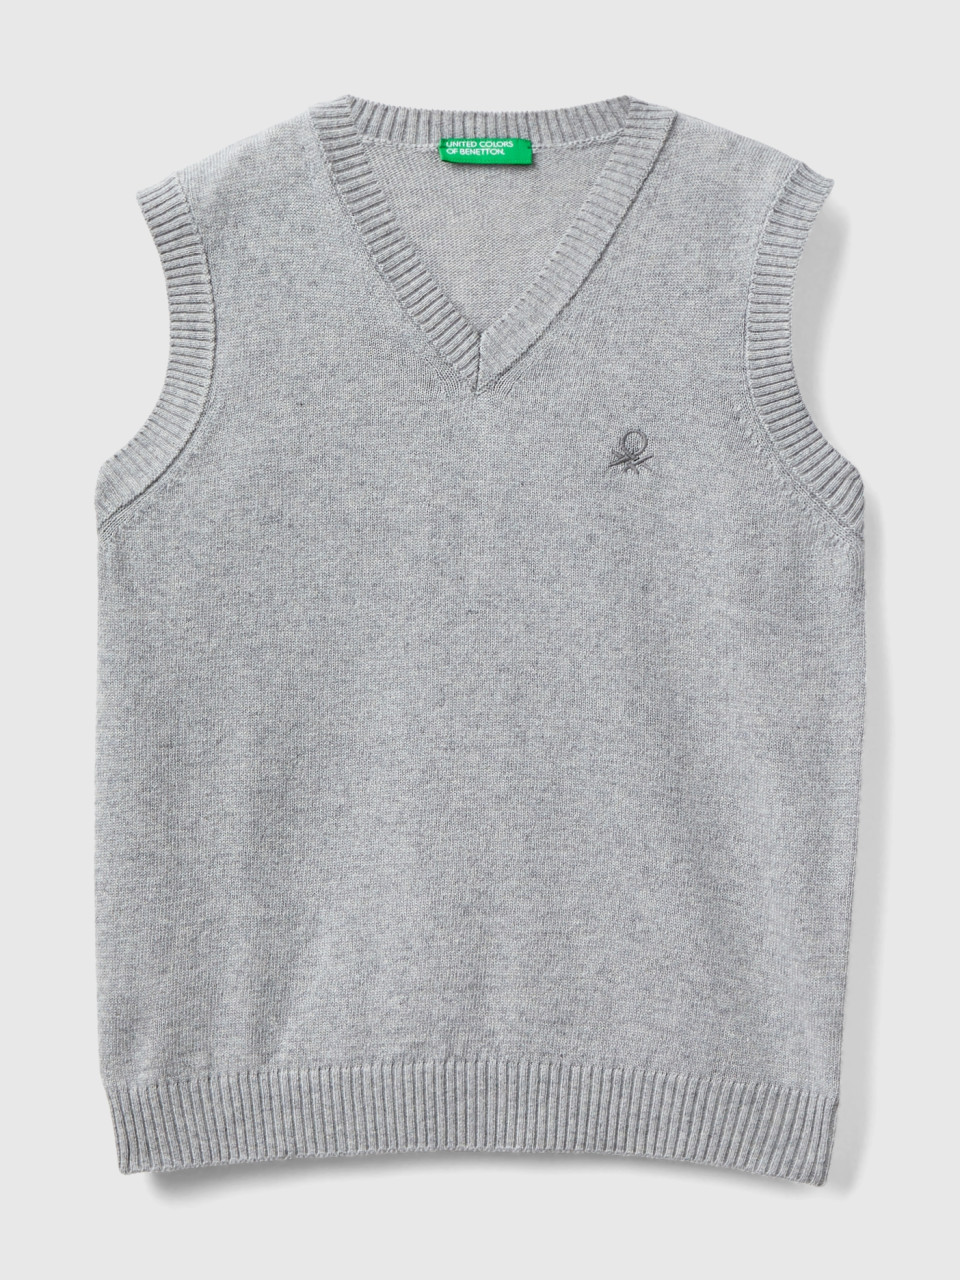 Benetton, Vest In Cashmere And Wool Blend, Light Gray, Kids